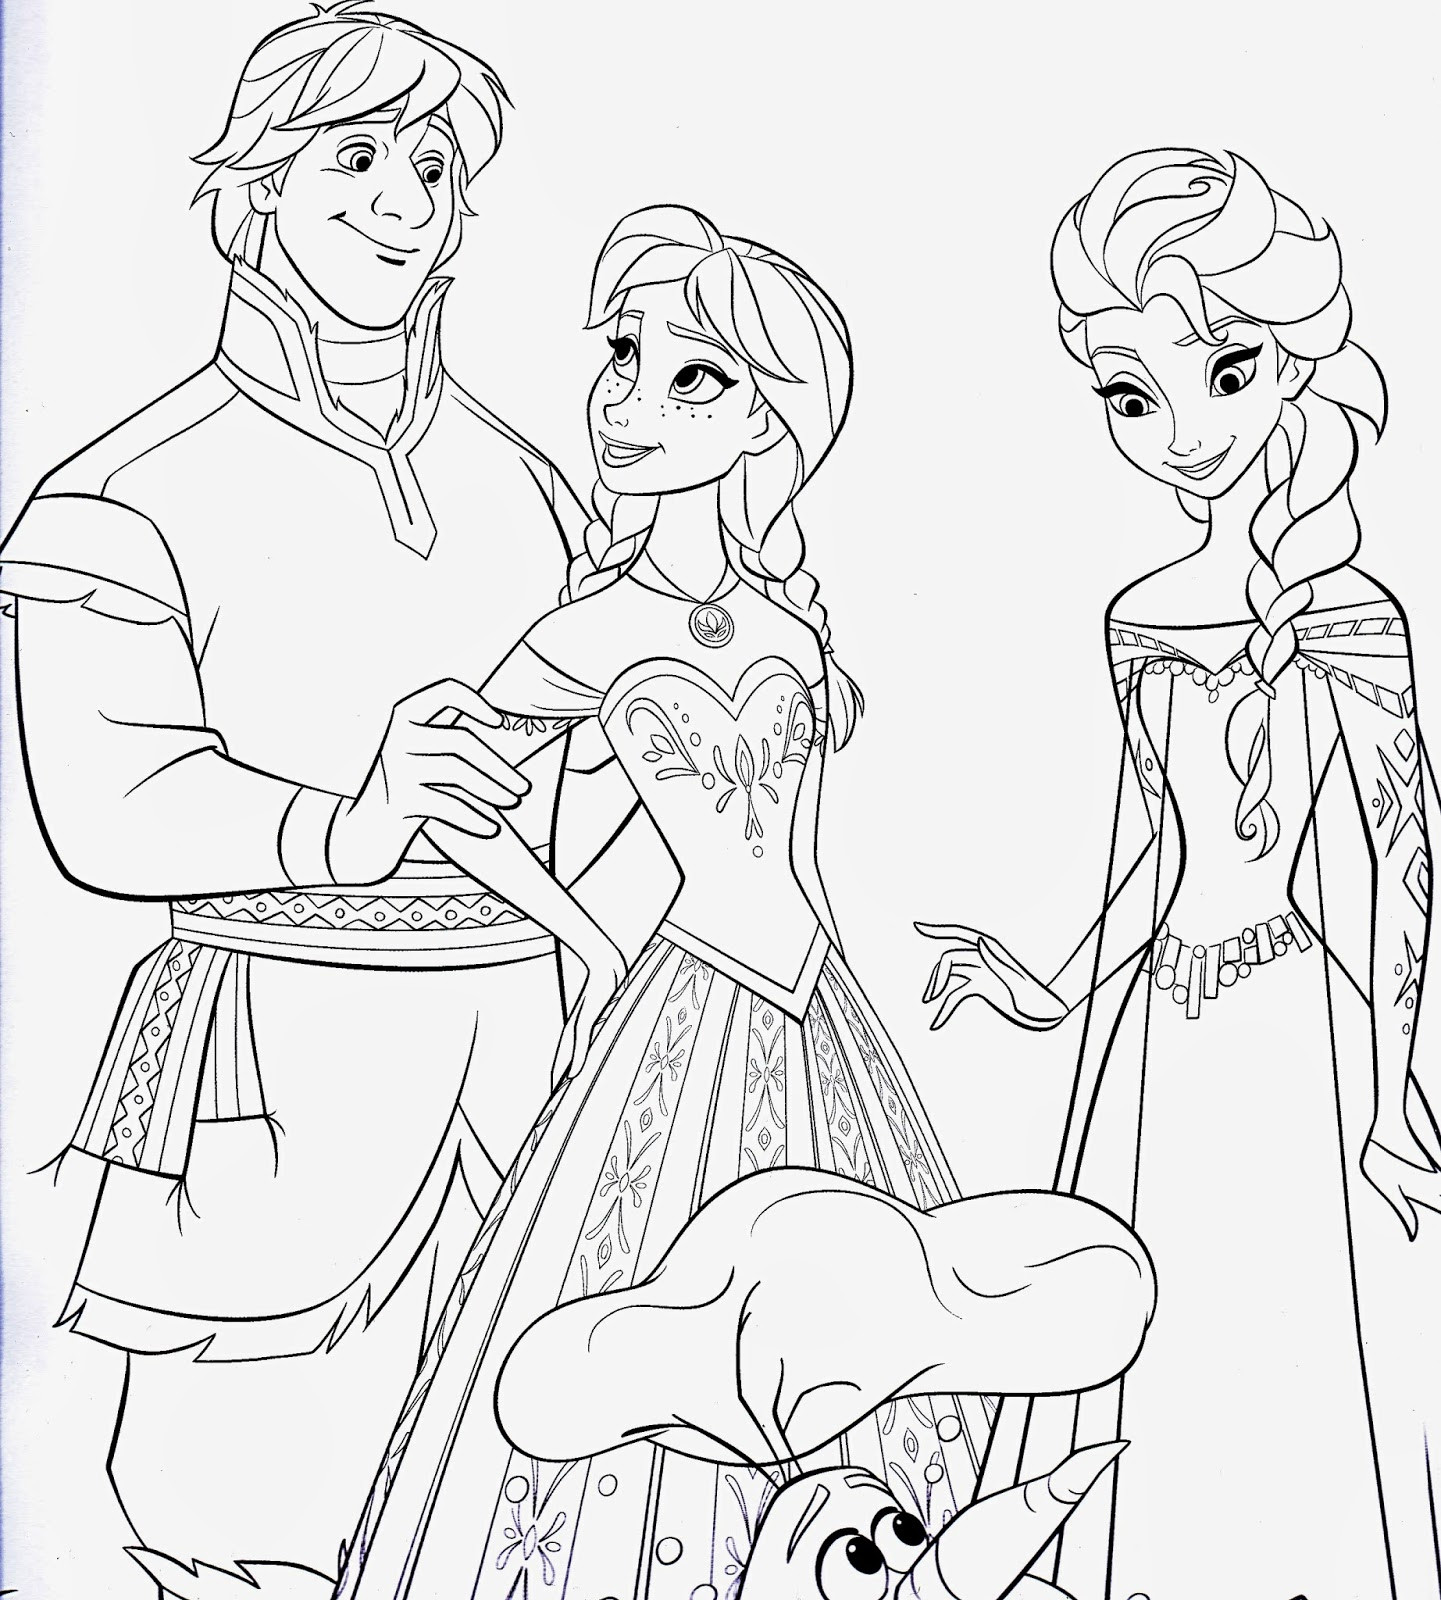 Frozen Coloring Pages Free Printable
 Disney Movie Princesses "Frozen" Printable Coloring Pages